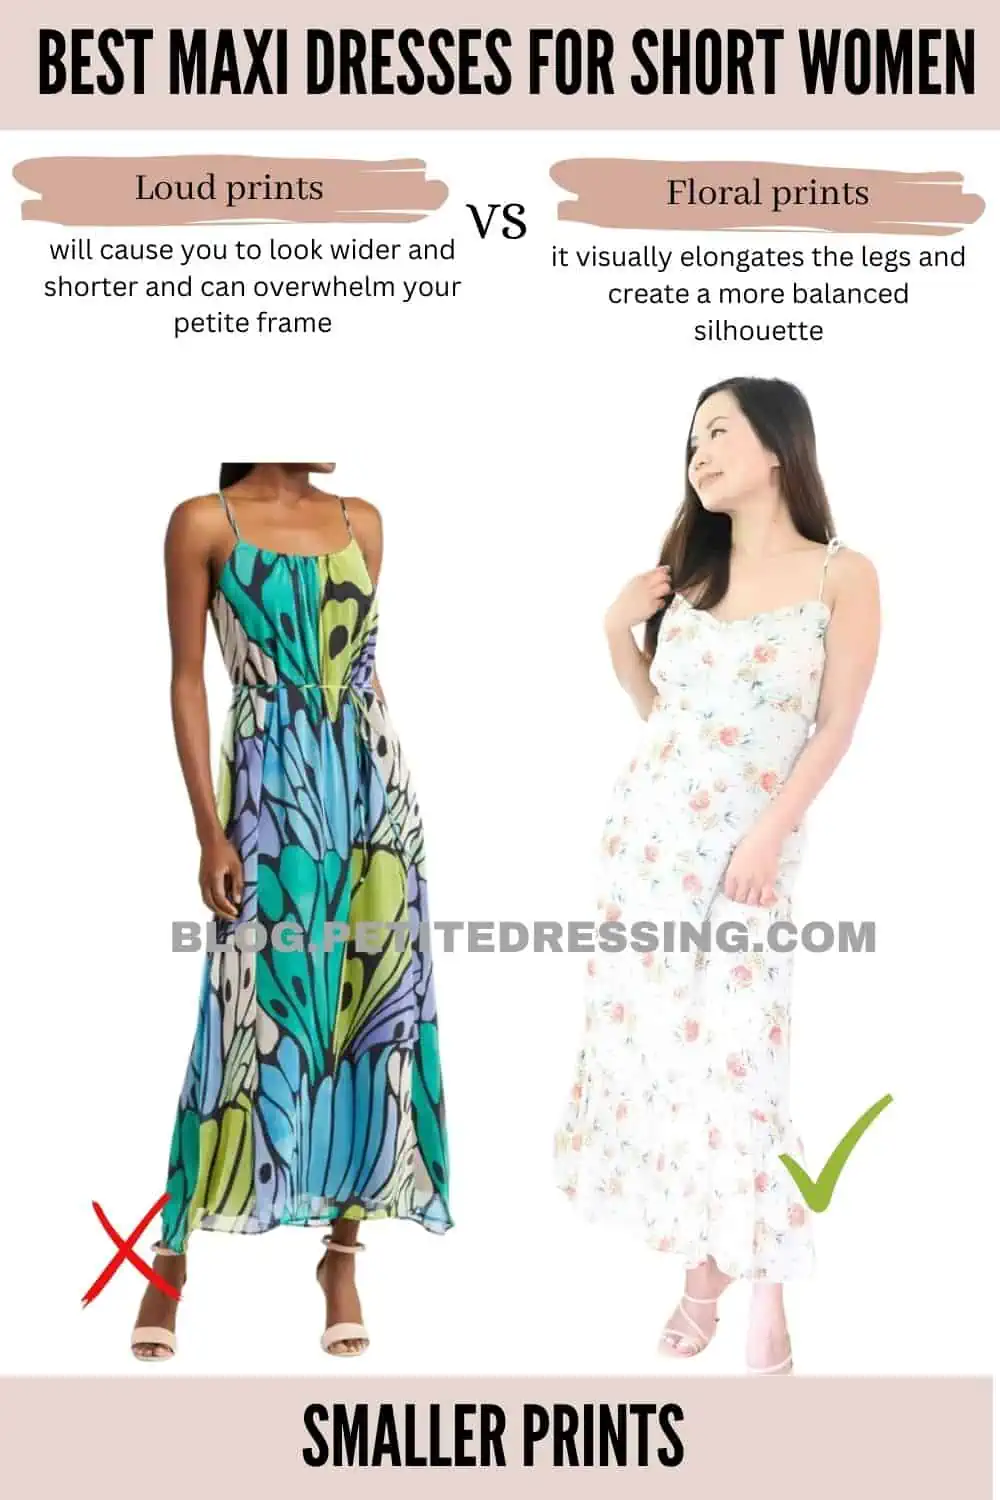 How to wear maxi dresses if you are short like me - YouTube